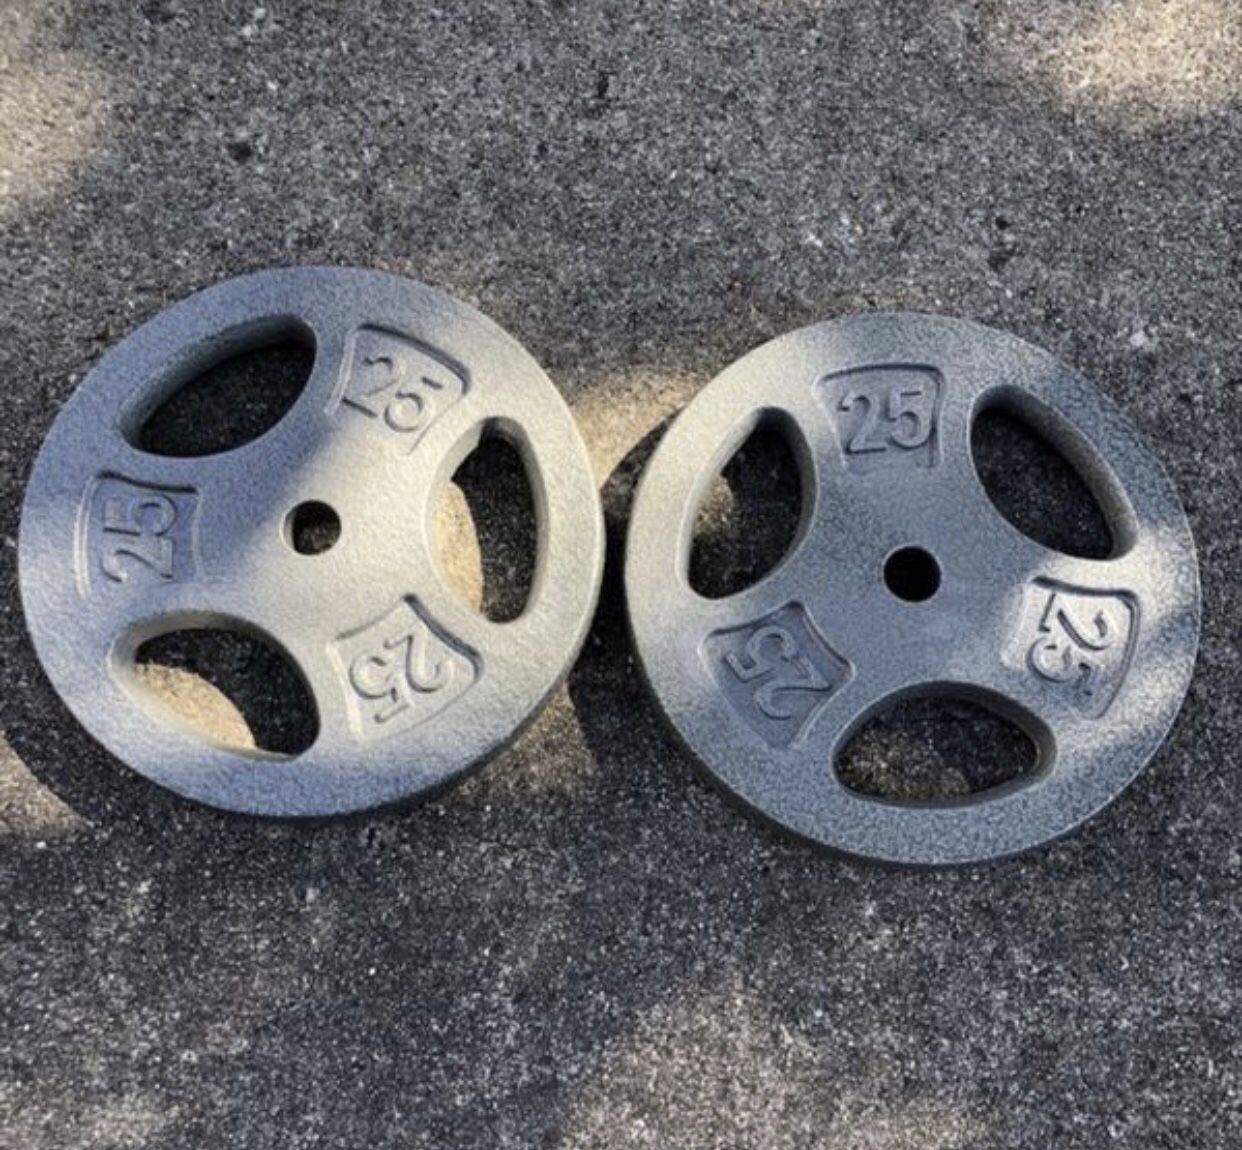 Brand new 25lb weight plates set of 2